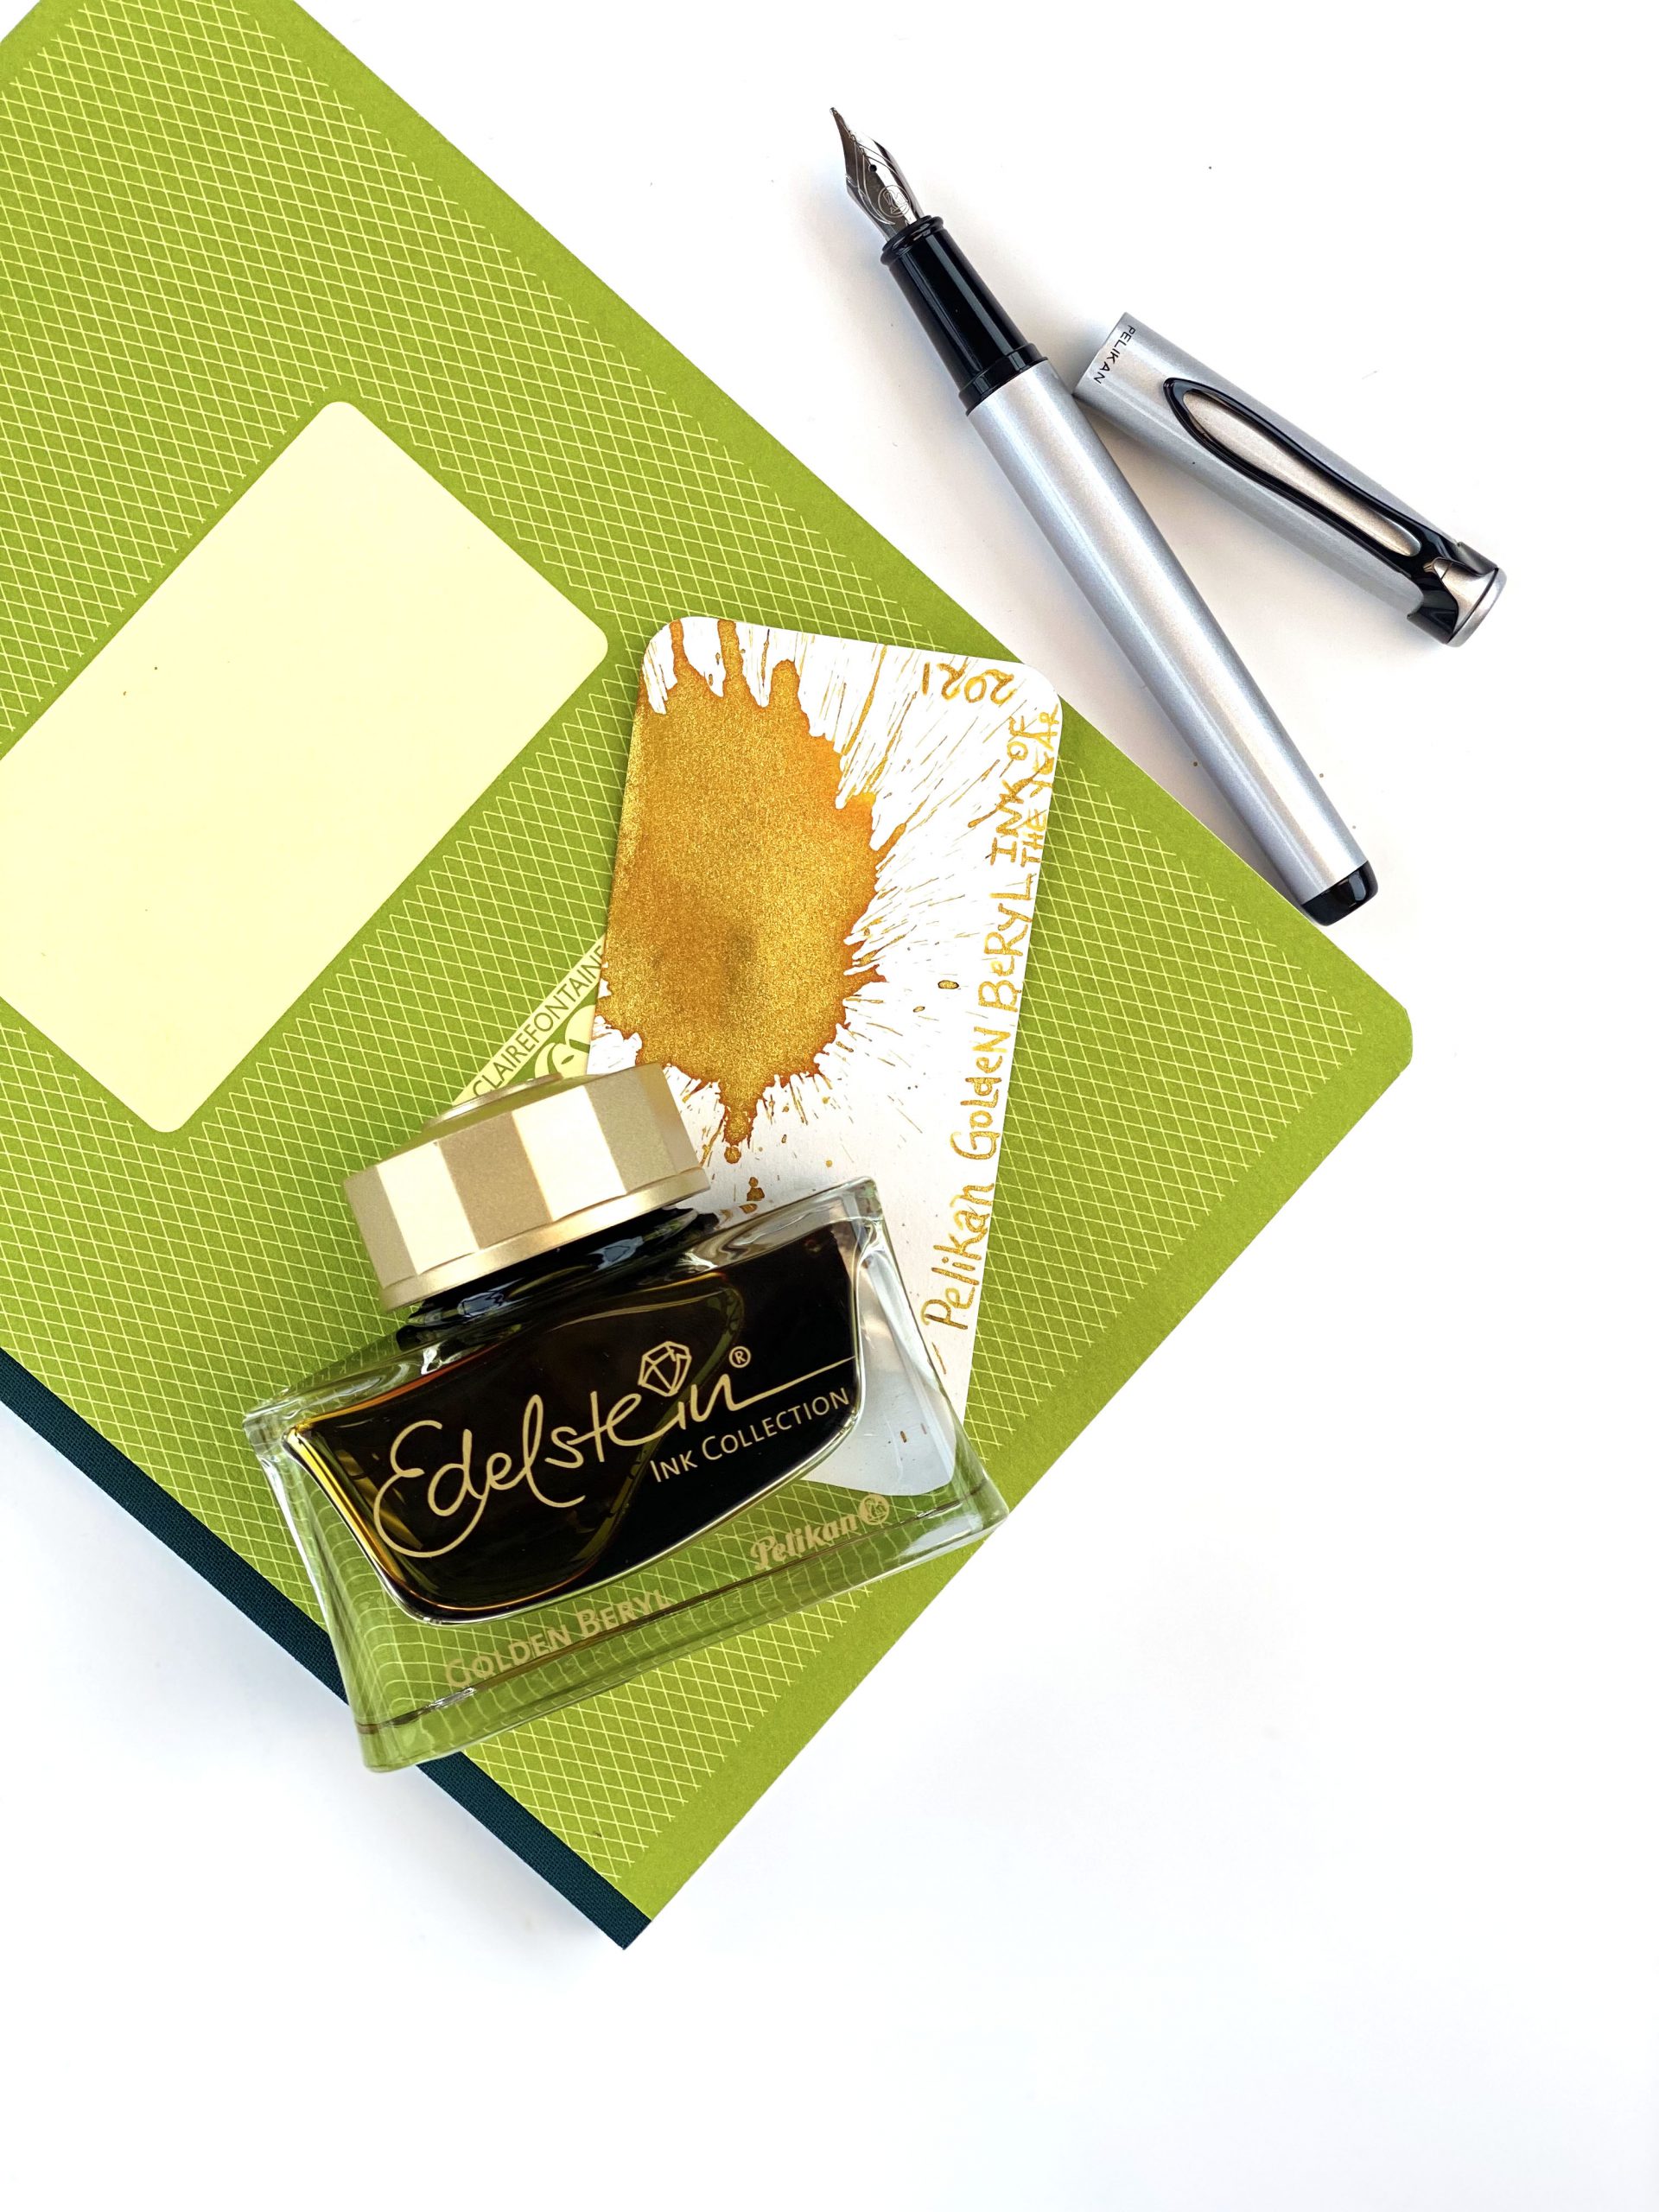 Golden Beryl Giveaway: Win an Ink of the Year & a Fountain Pen - Pen Chalet